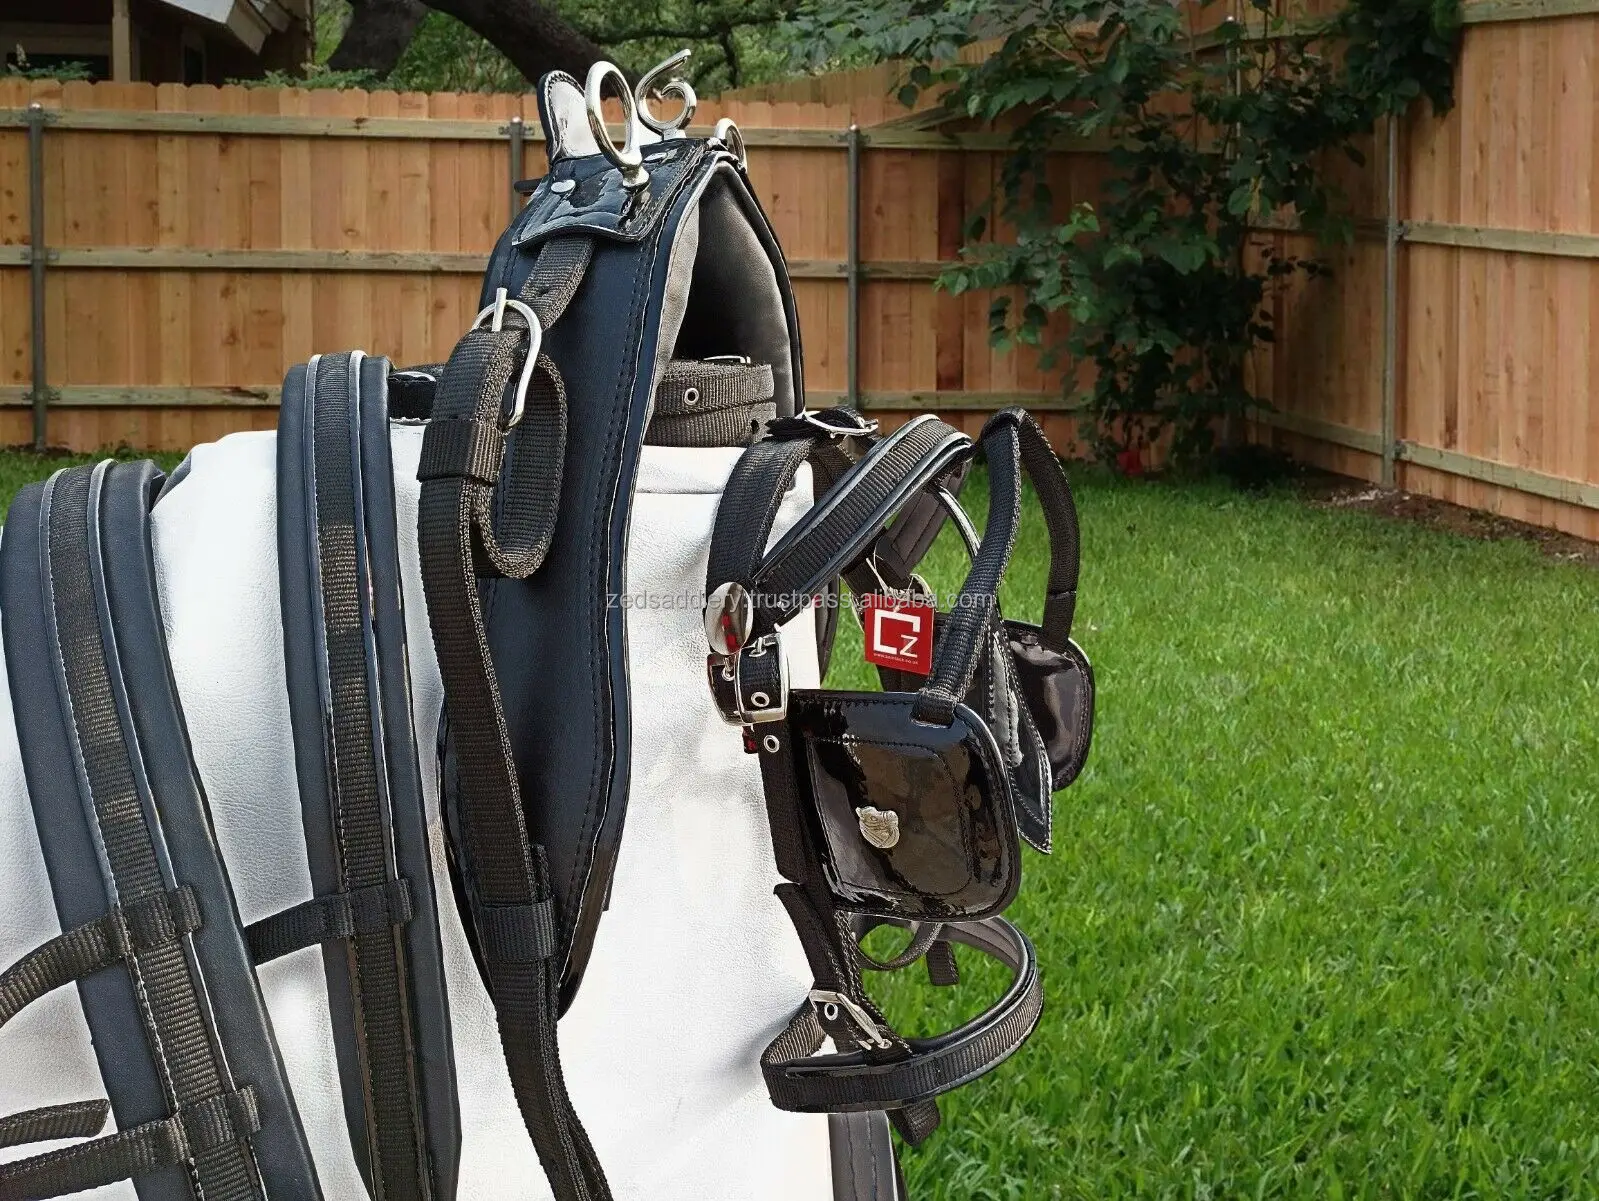 NEW NYLON WEBBING DRIVING CART HARNESS SET COB SIZE FOR SINGLE HORSE TOP QUALITY 